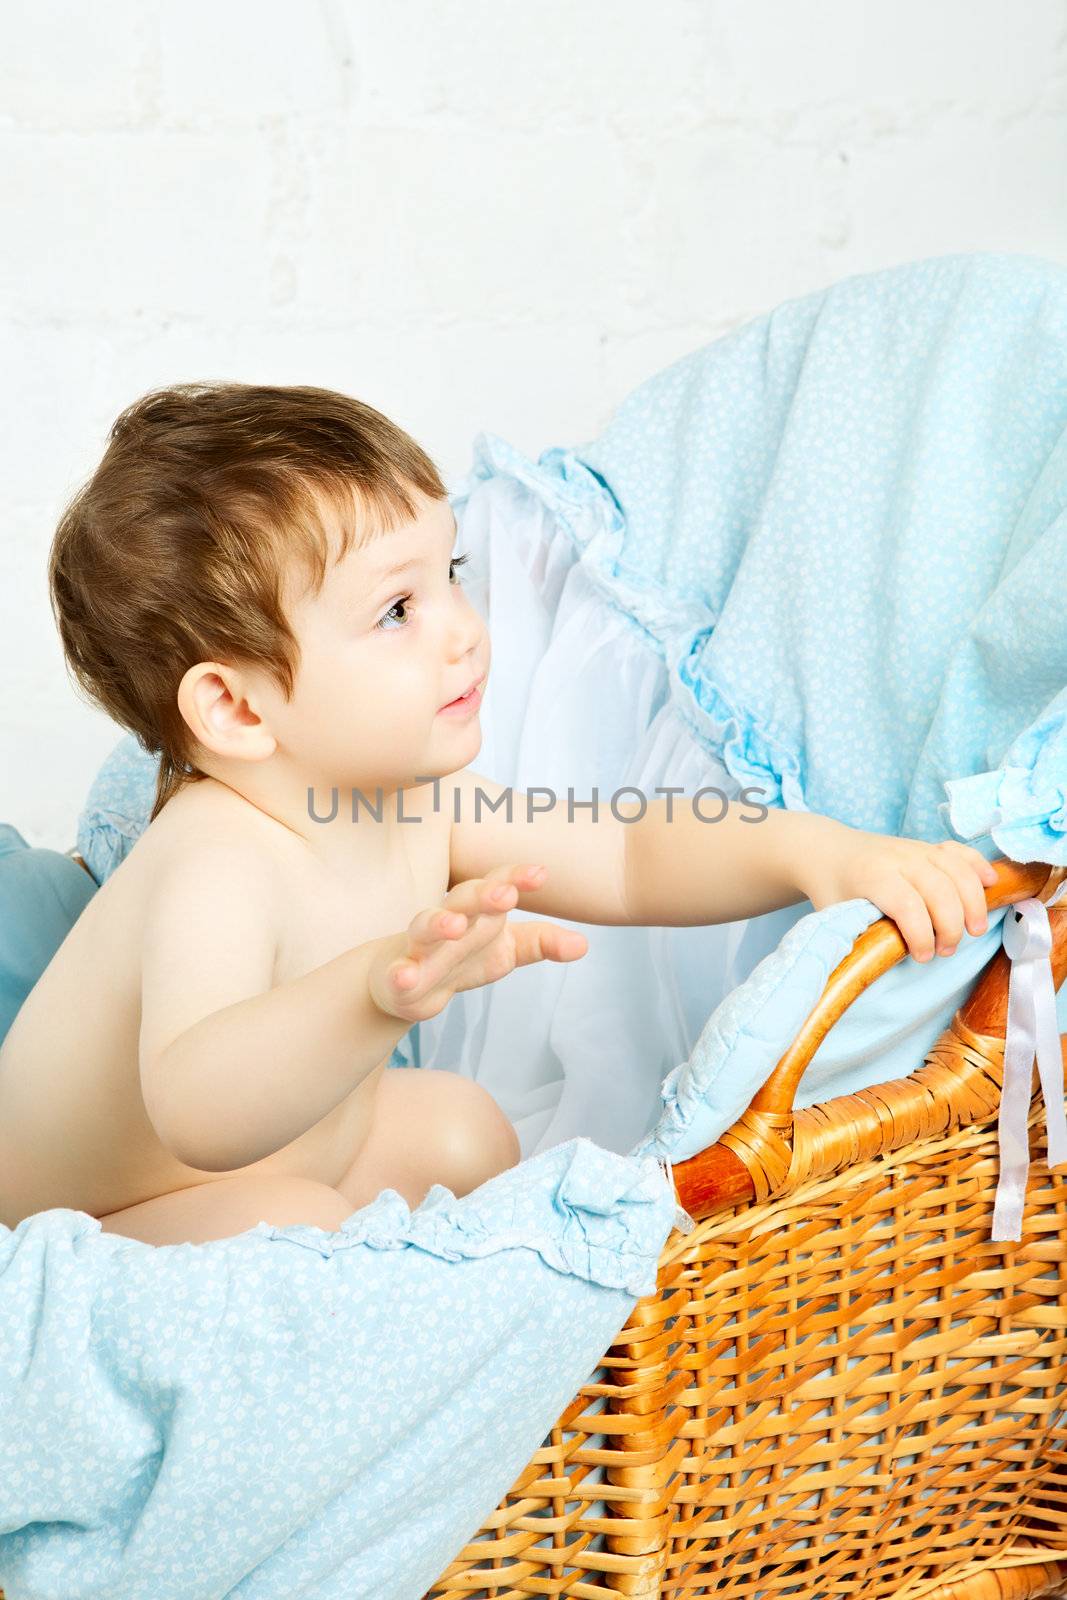 Child in Cradle by petr_malyshev